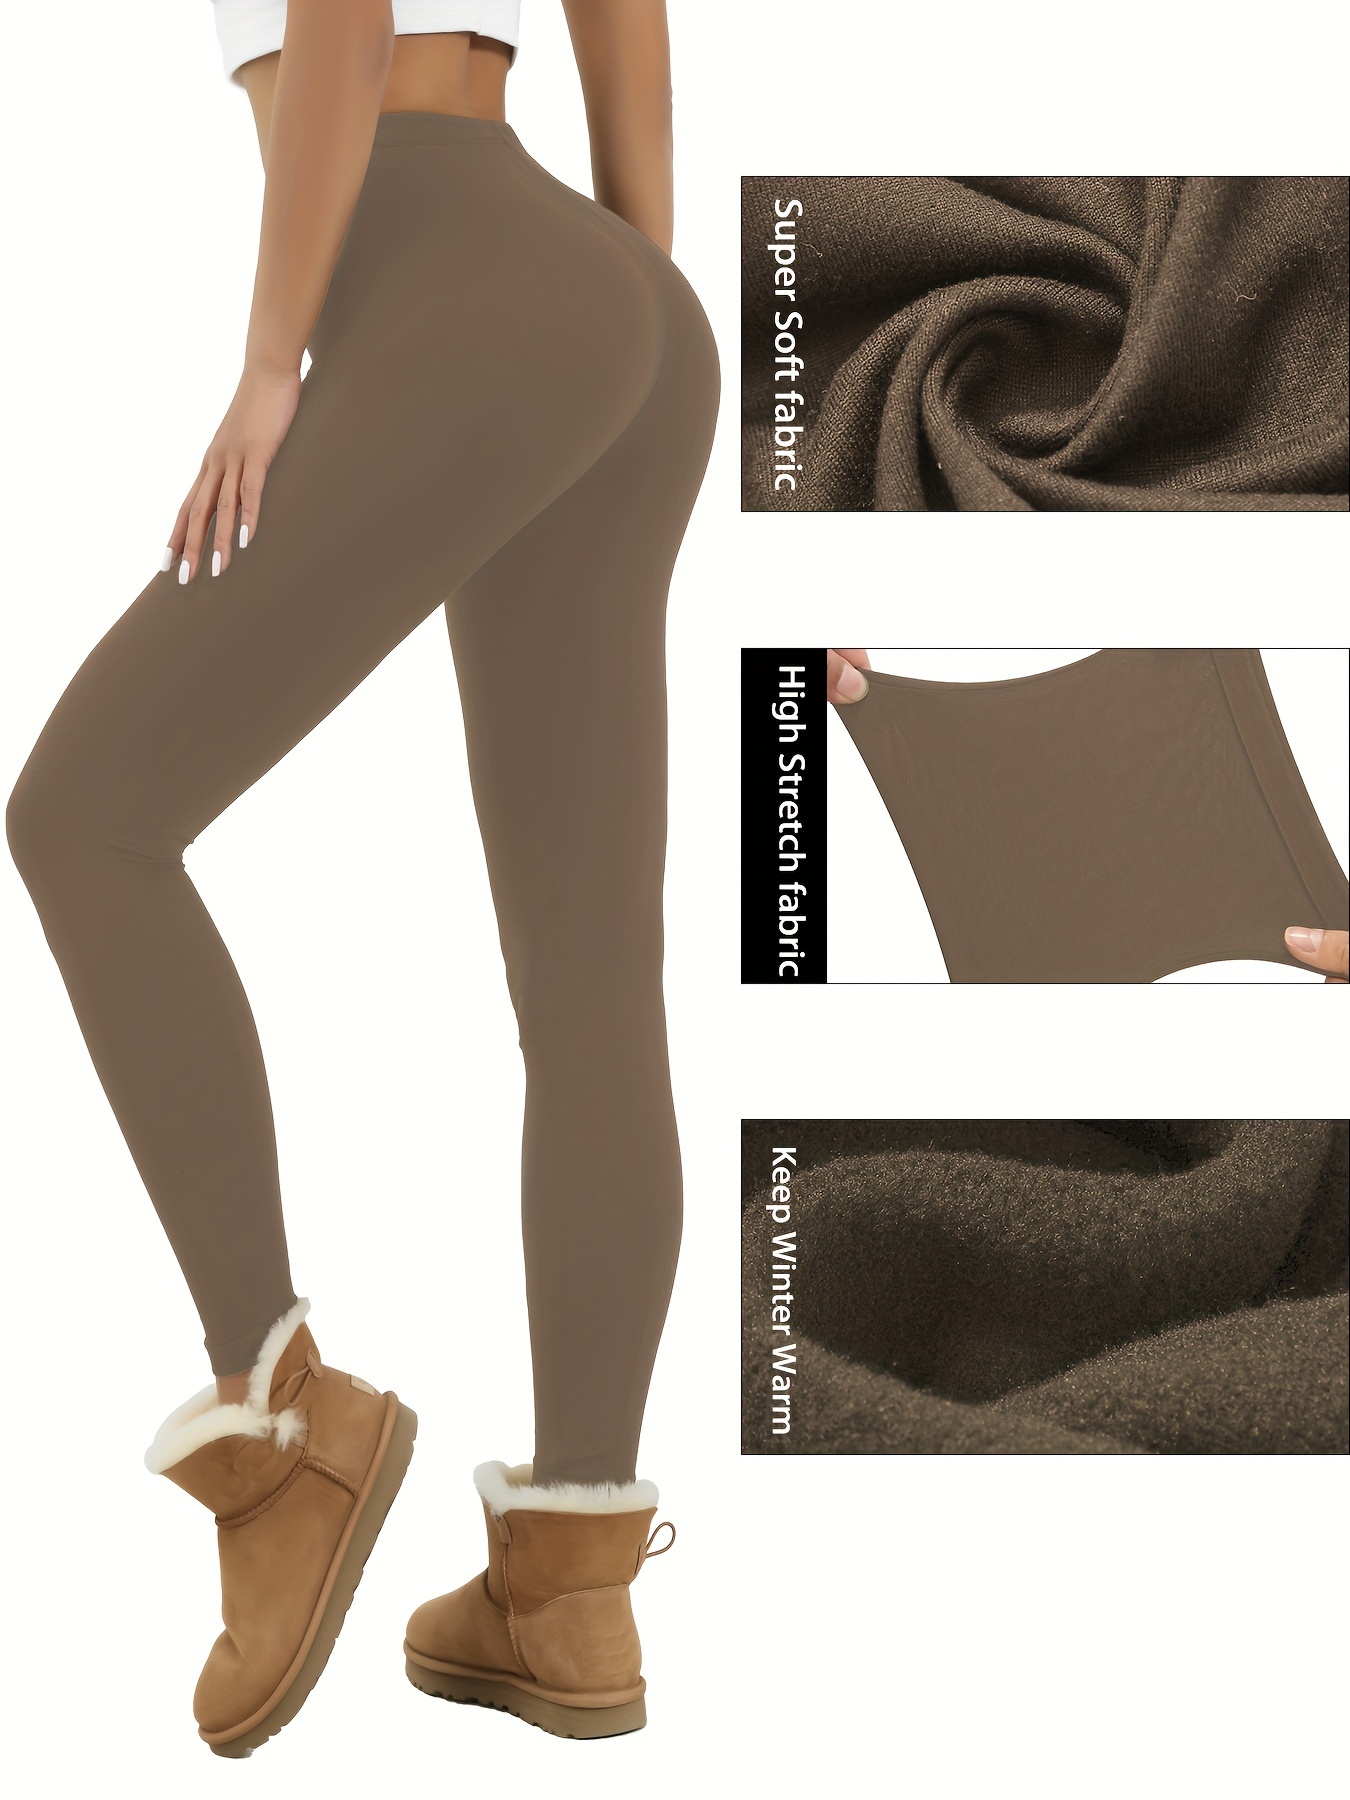 Womens Fleece Lined Winter Leggings Many Colors, Plus Size Available (S/M,  Brown)